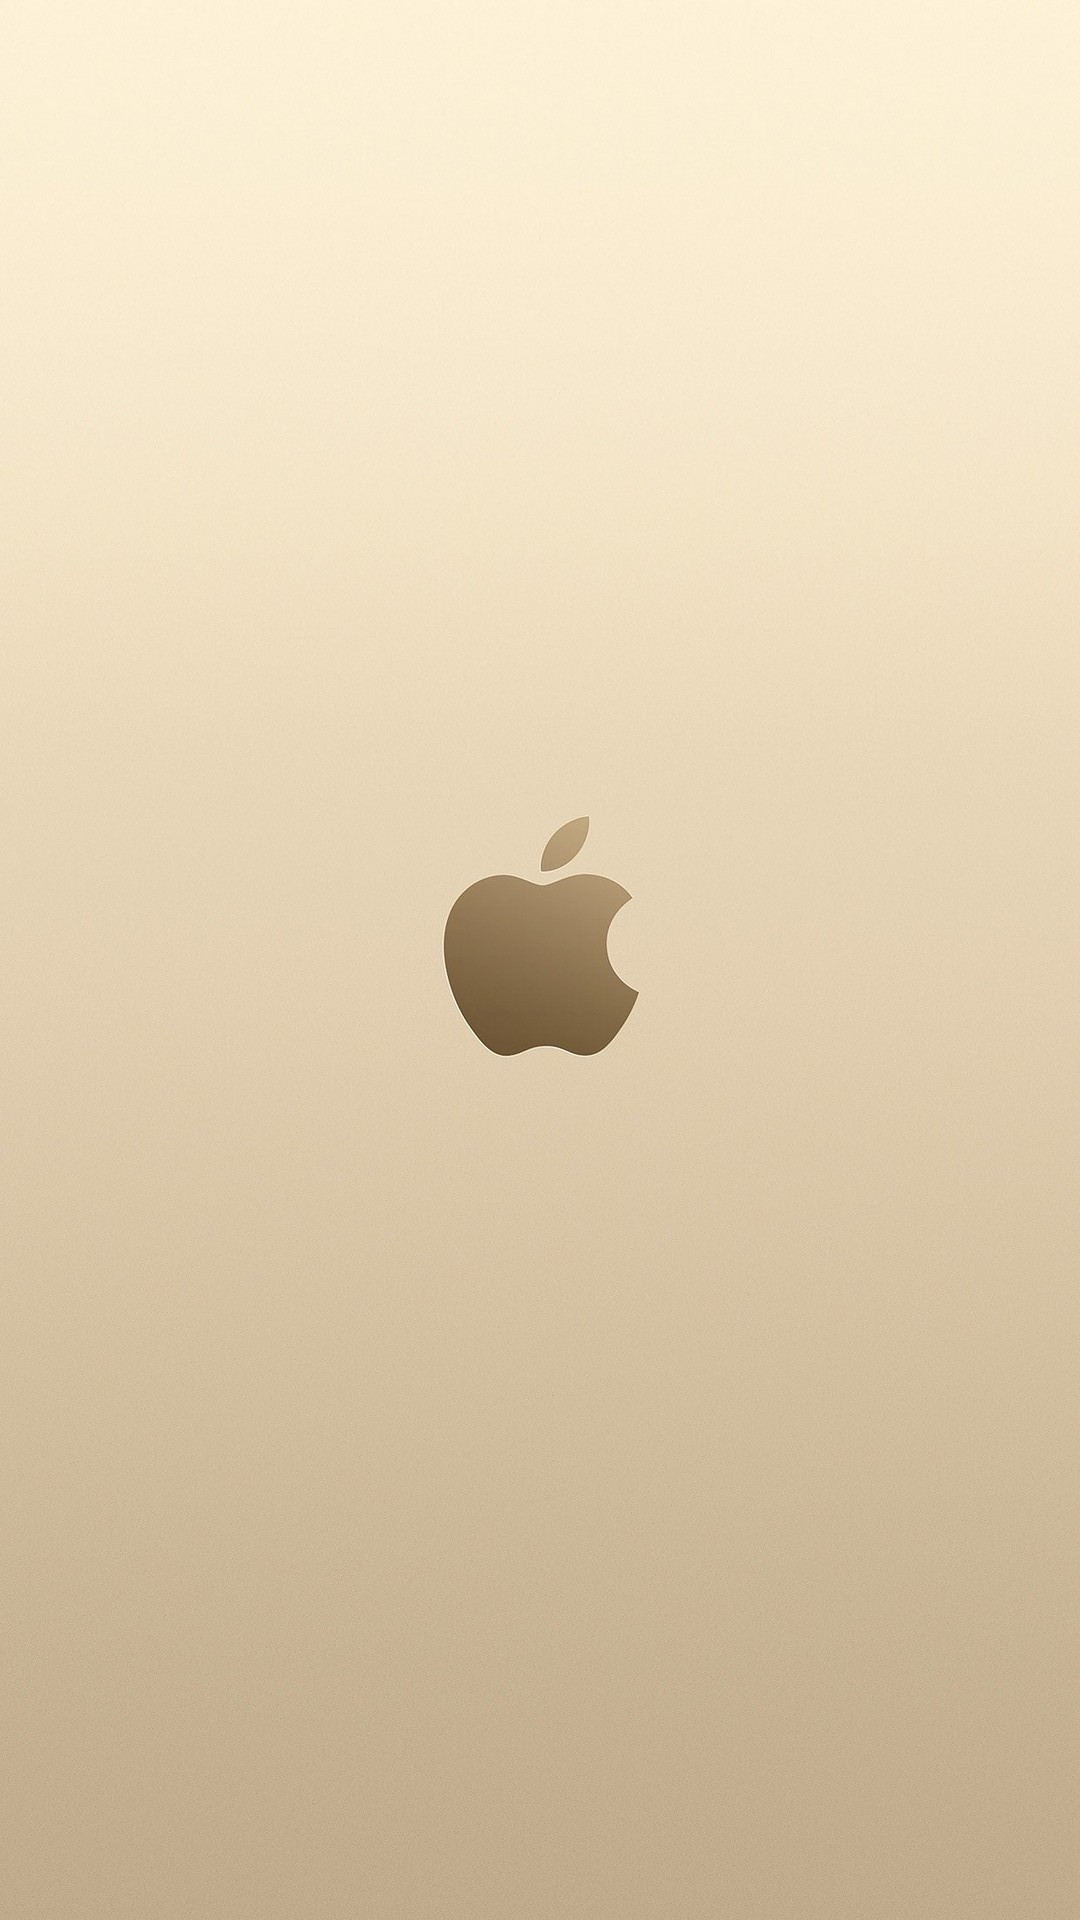 Metallic Gold Wallpaper Android High Resolution 1080X1920